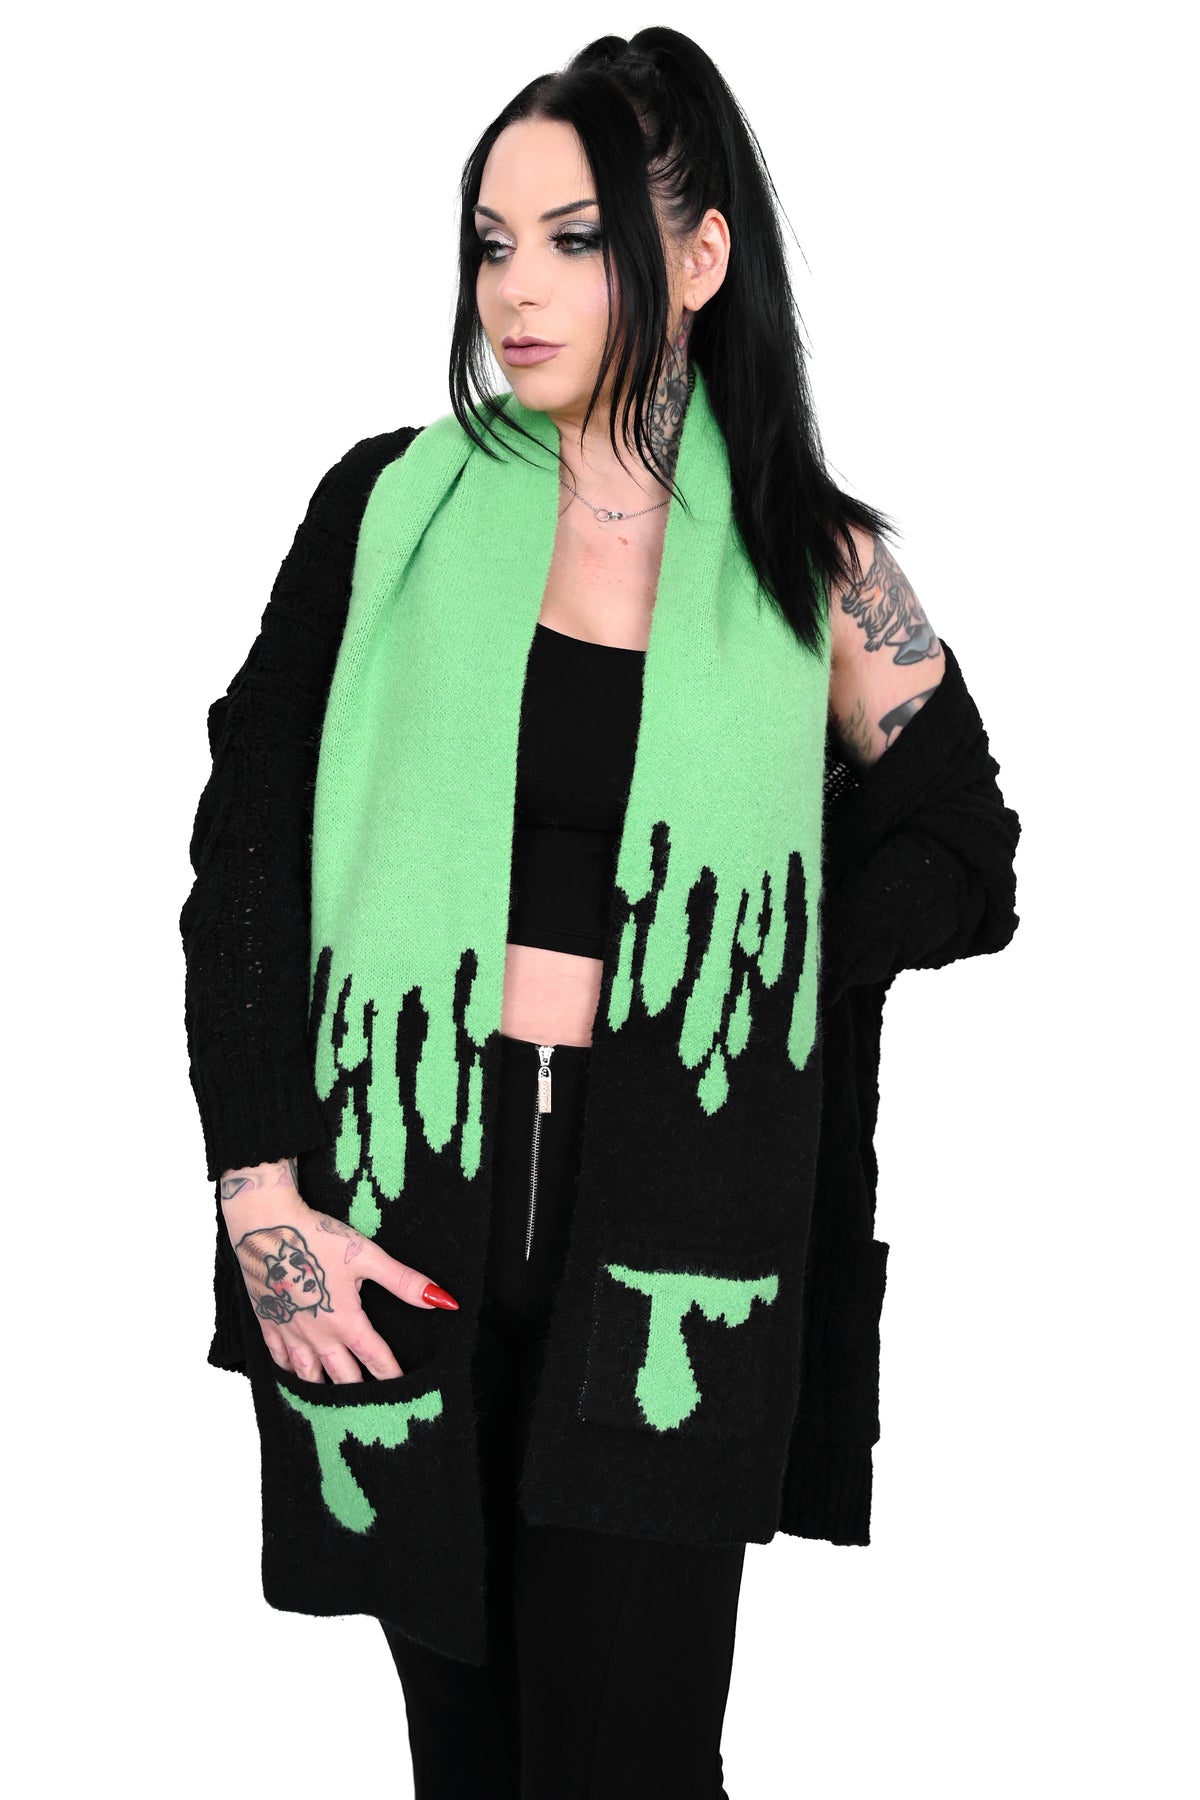 Black scarf with slime detail, inspired by a Foxblood Halloween fave!